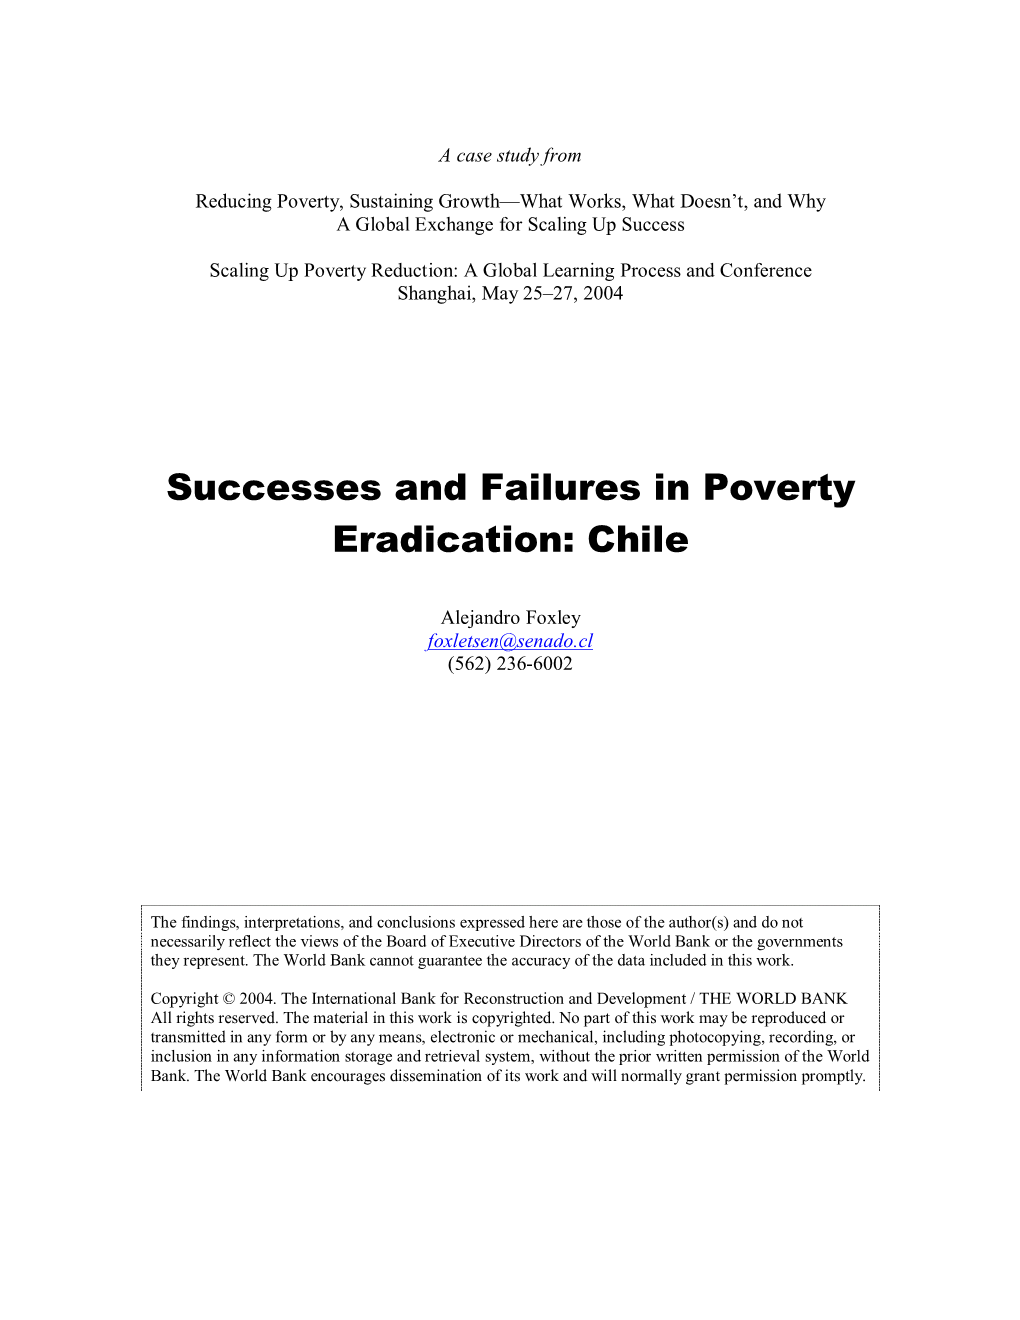 Successes and Failures in Poverty Eradication: Chile